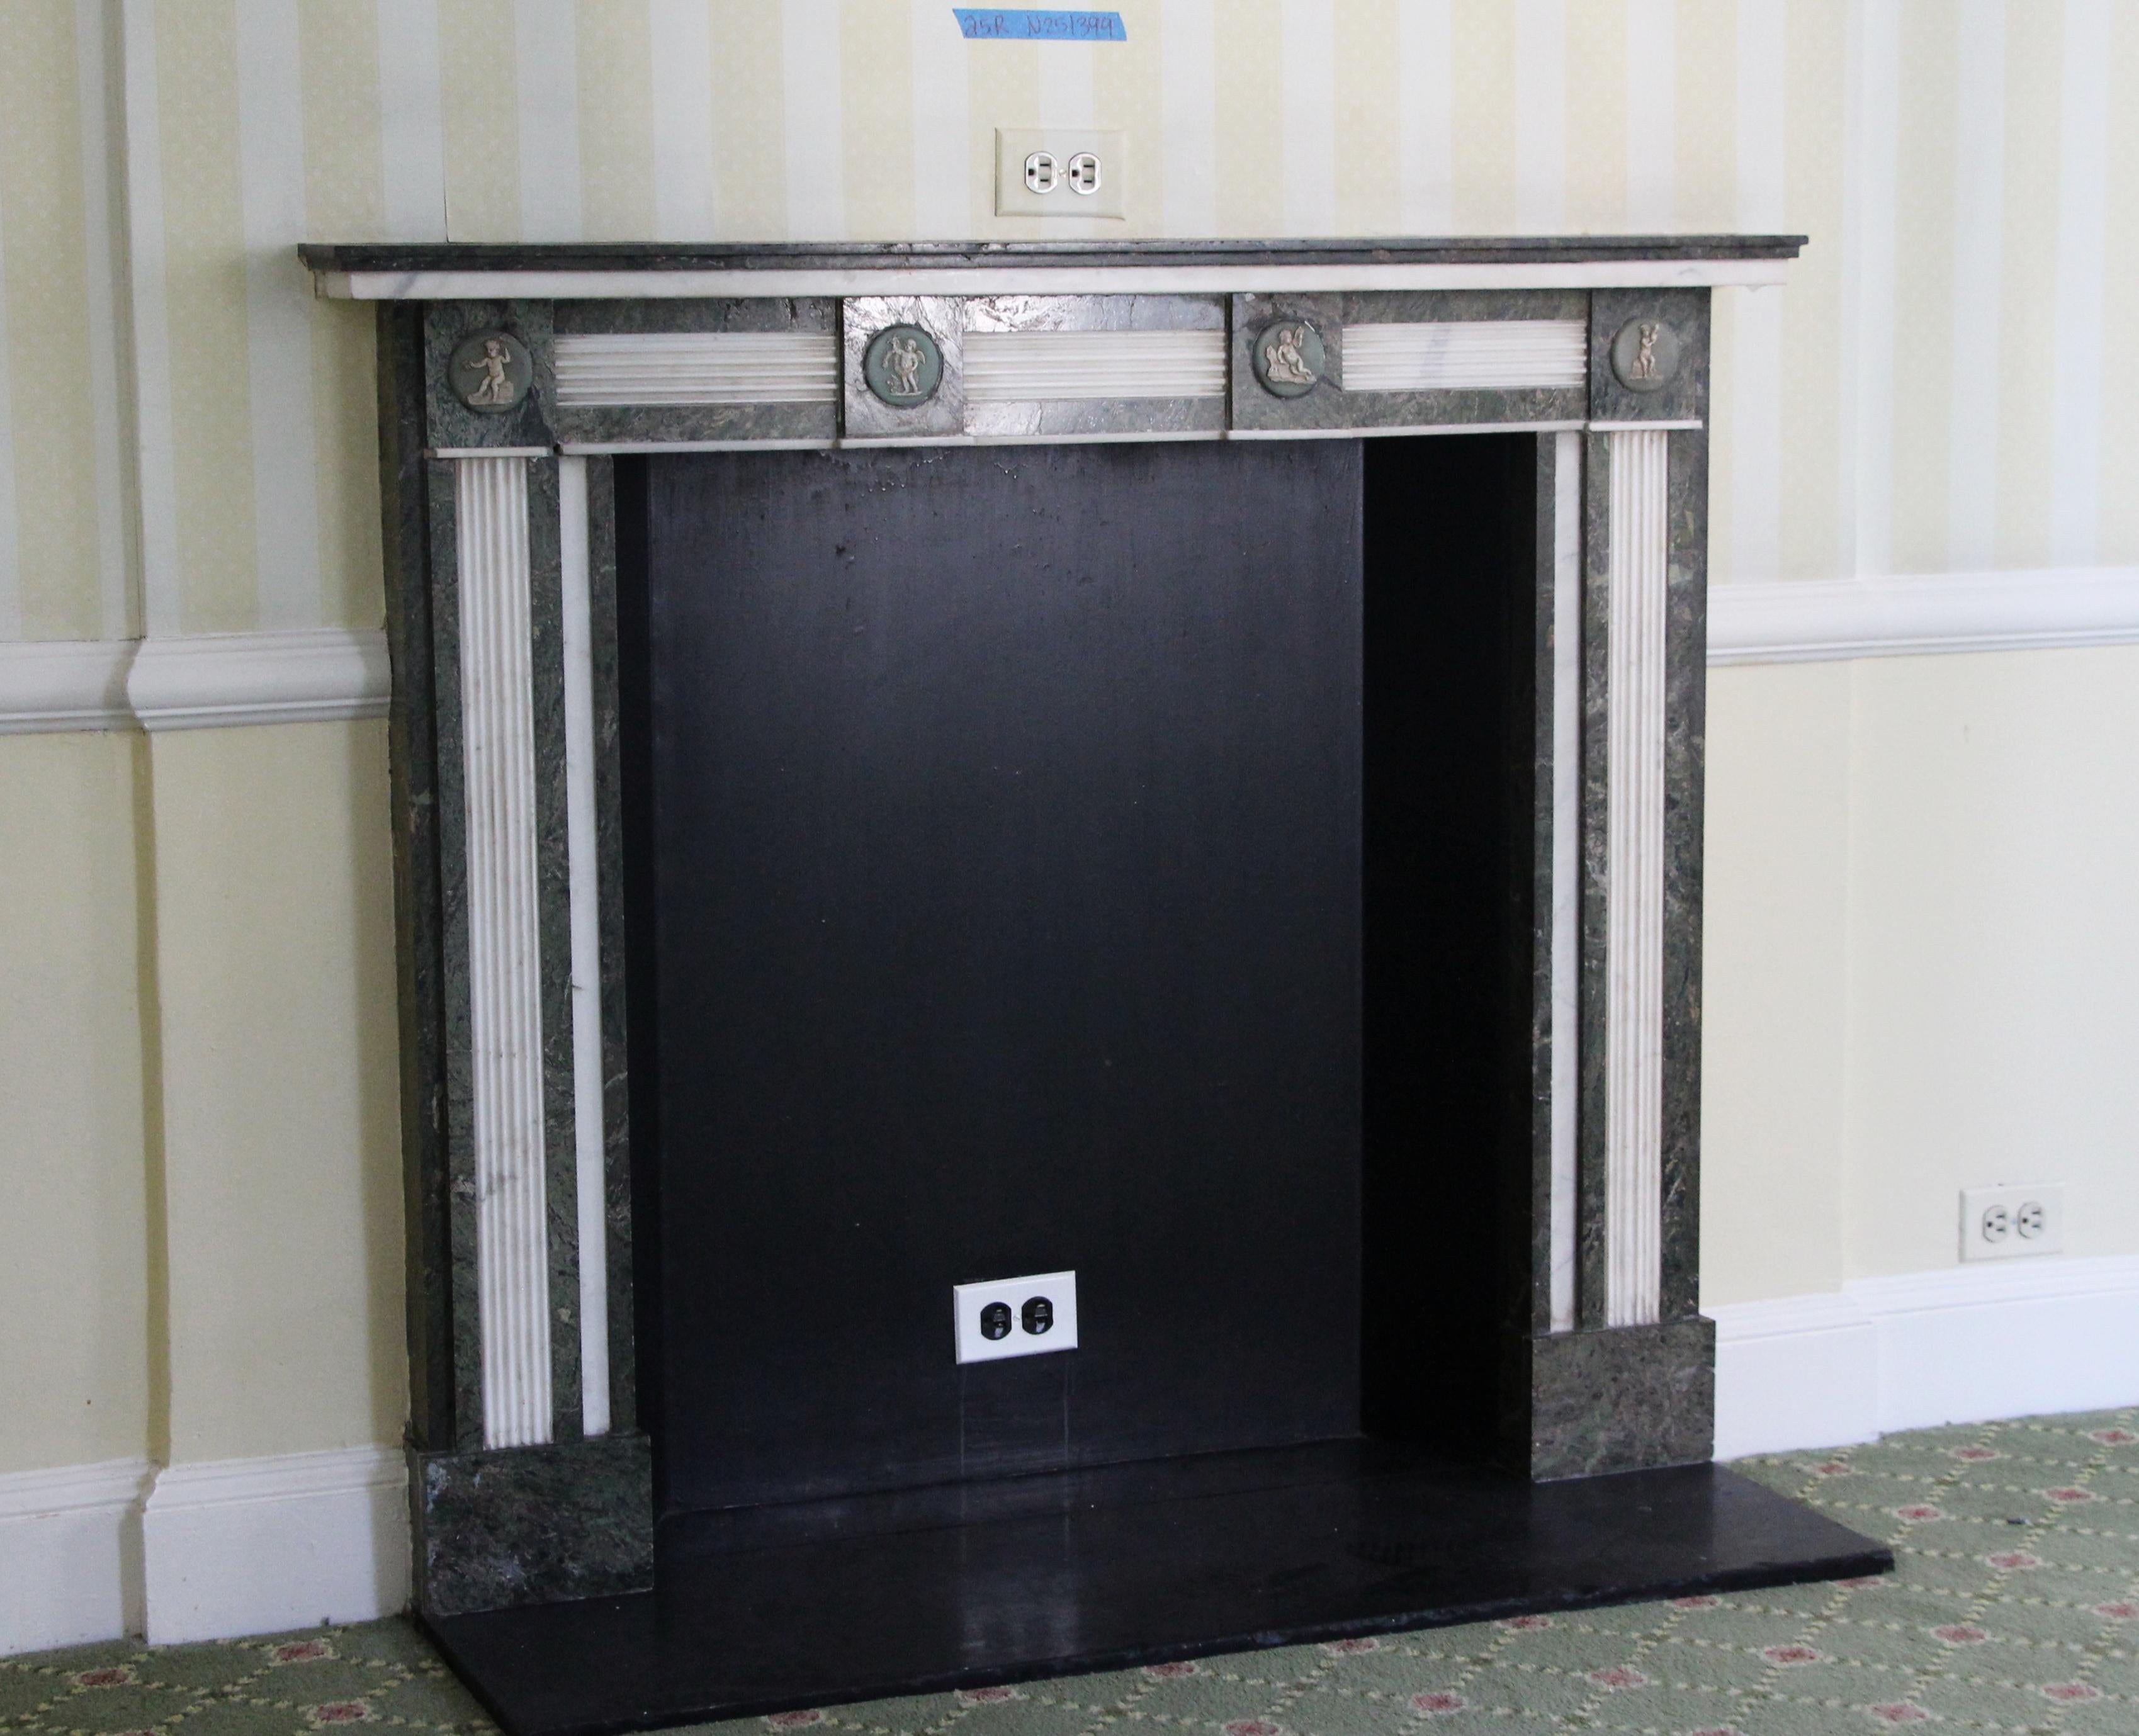 Heath not available. This mantel was one of a group of antique mantels imported from Europe and installed in the Waldorf Astoria hotel in 1931 when the hotel was first built on Park Avenue, circa 1890s, France. This gray and white marble mantel with